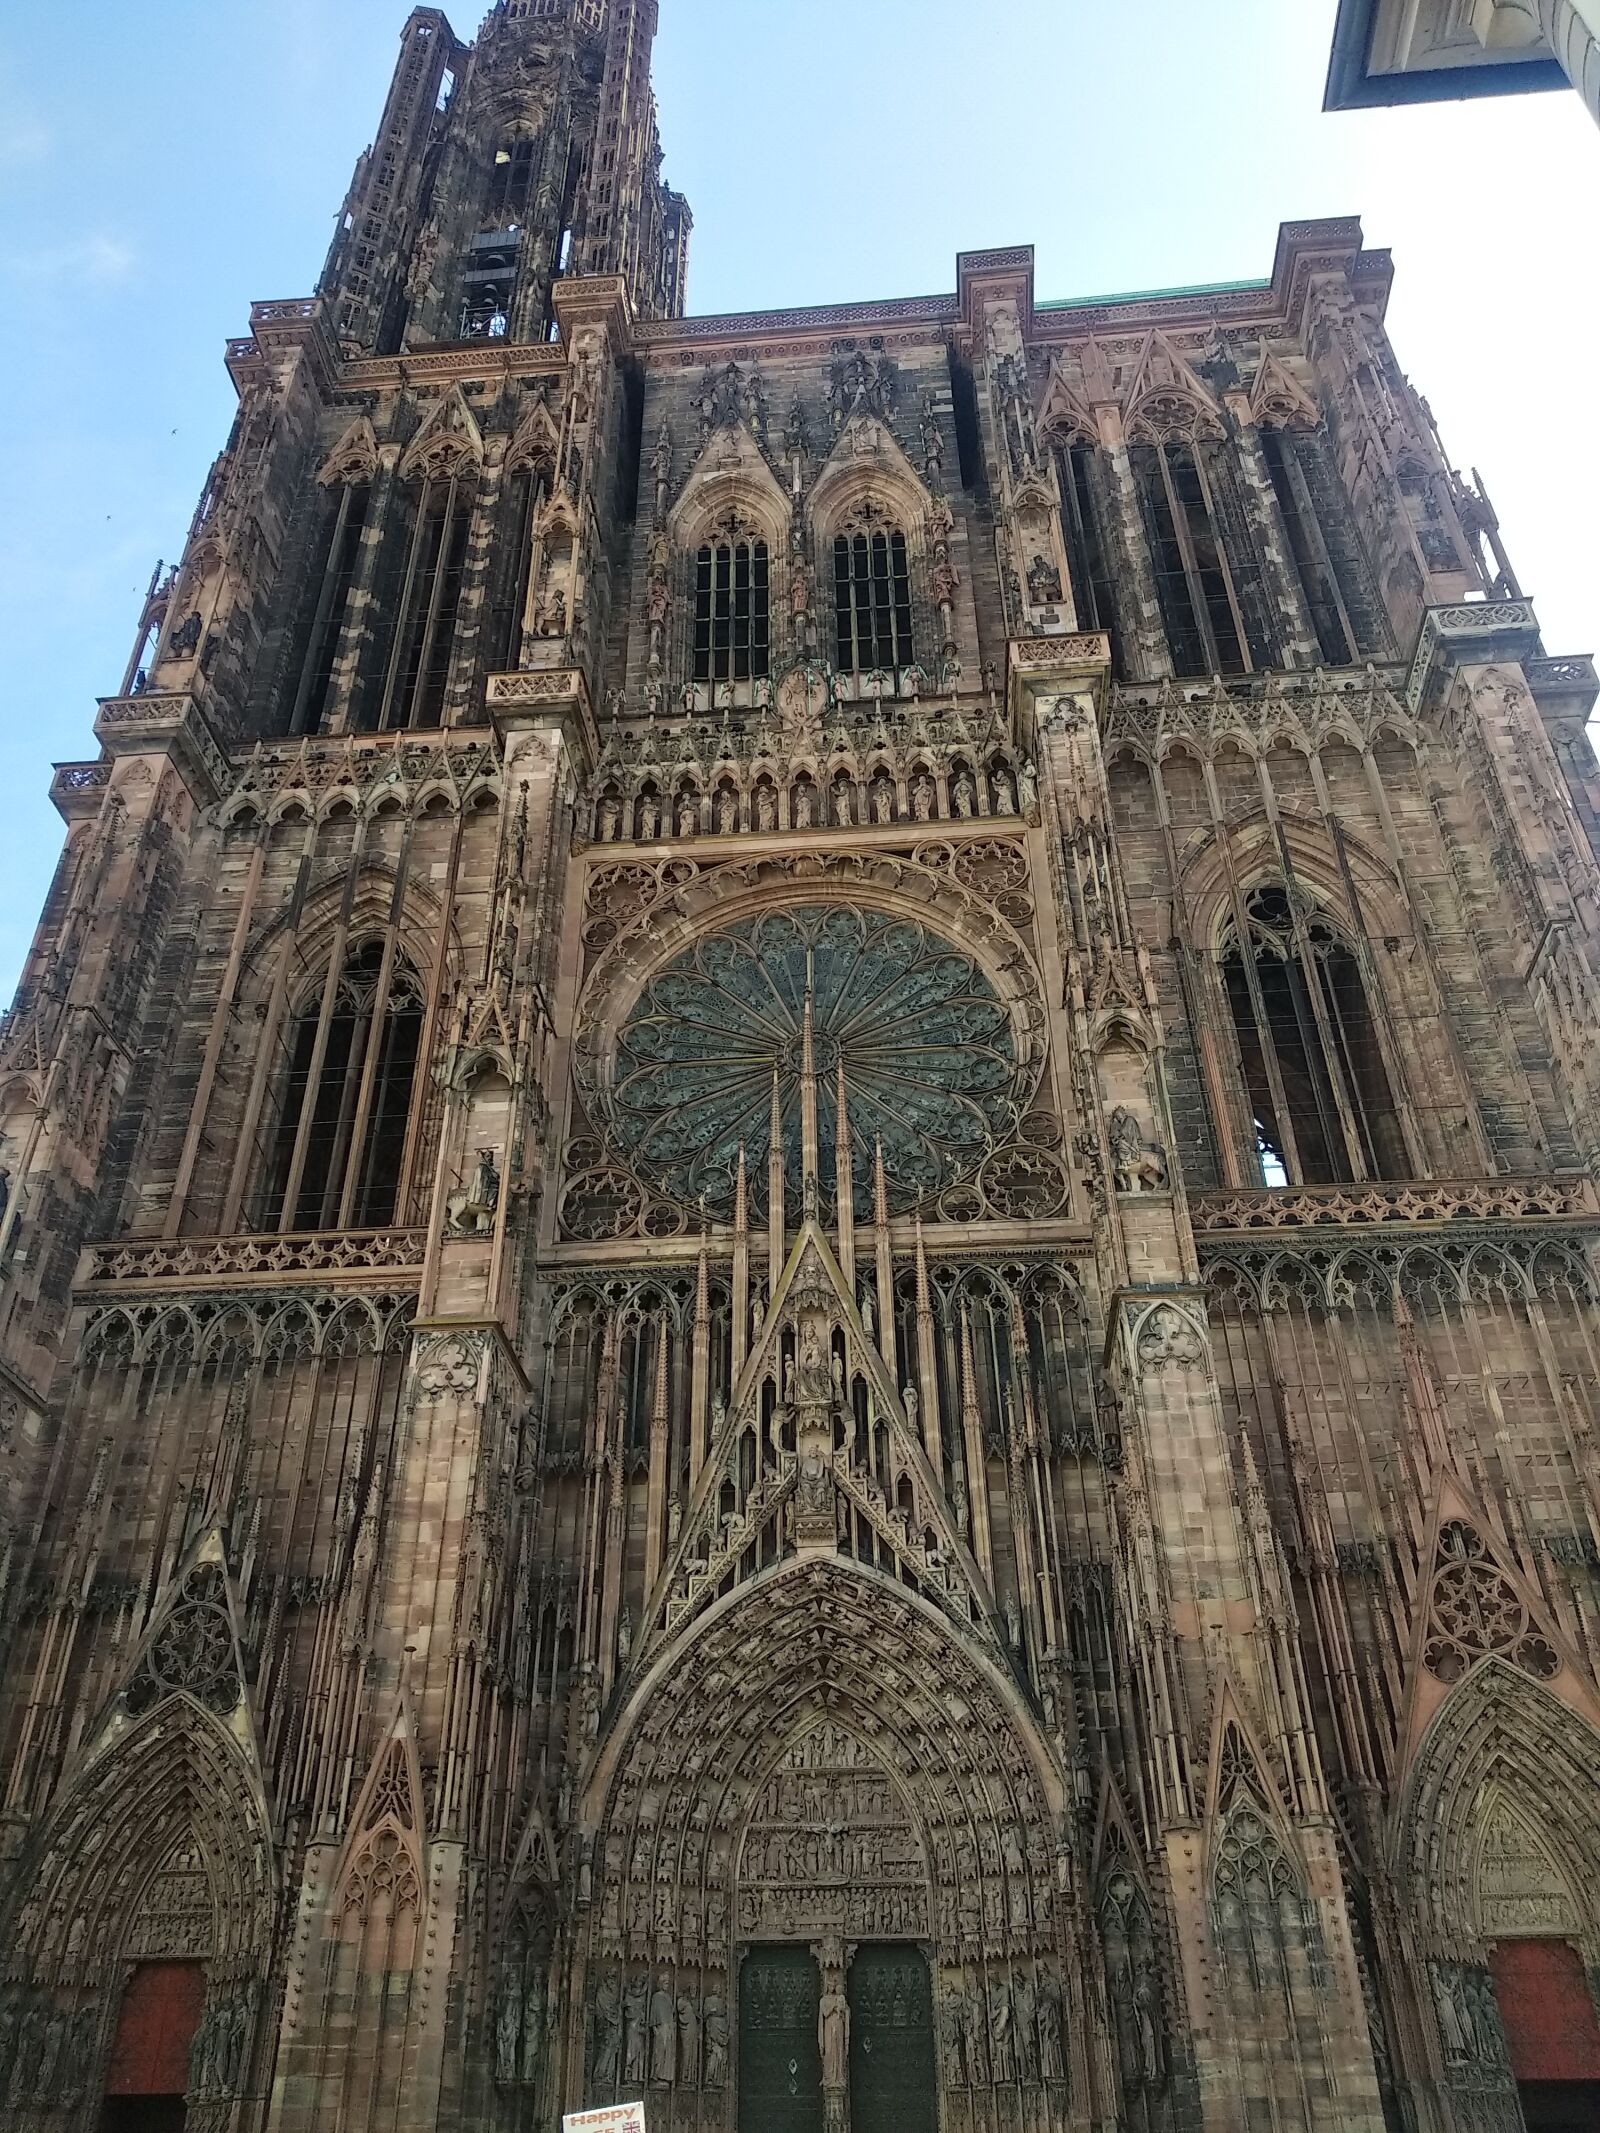 Xiaomi Redmi Note 5 sample photo. Strasbourg, cathedral, beauty photography